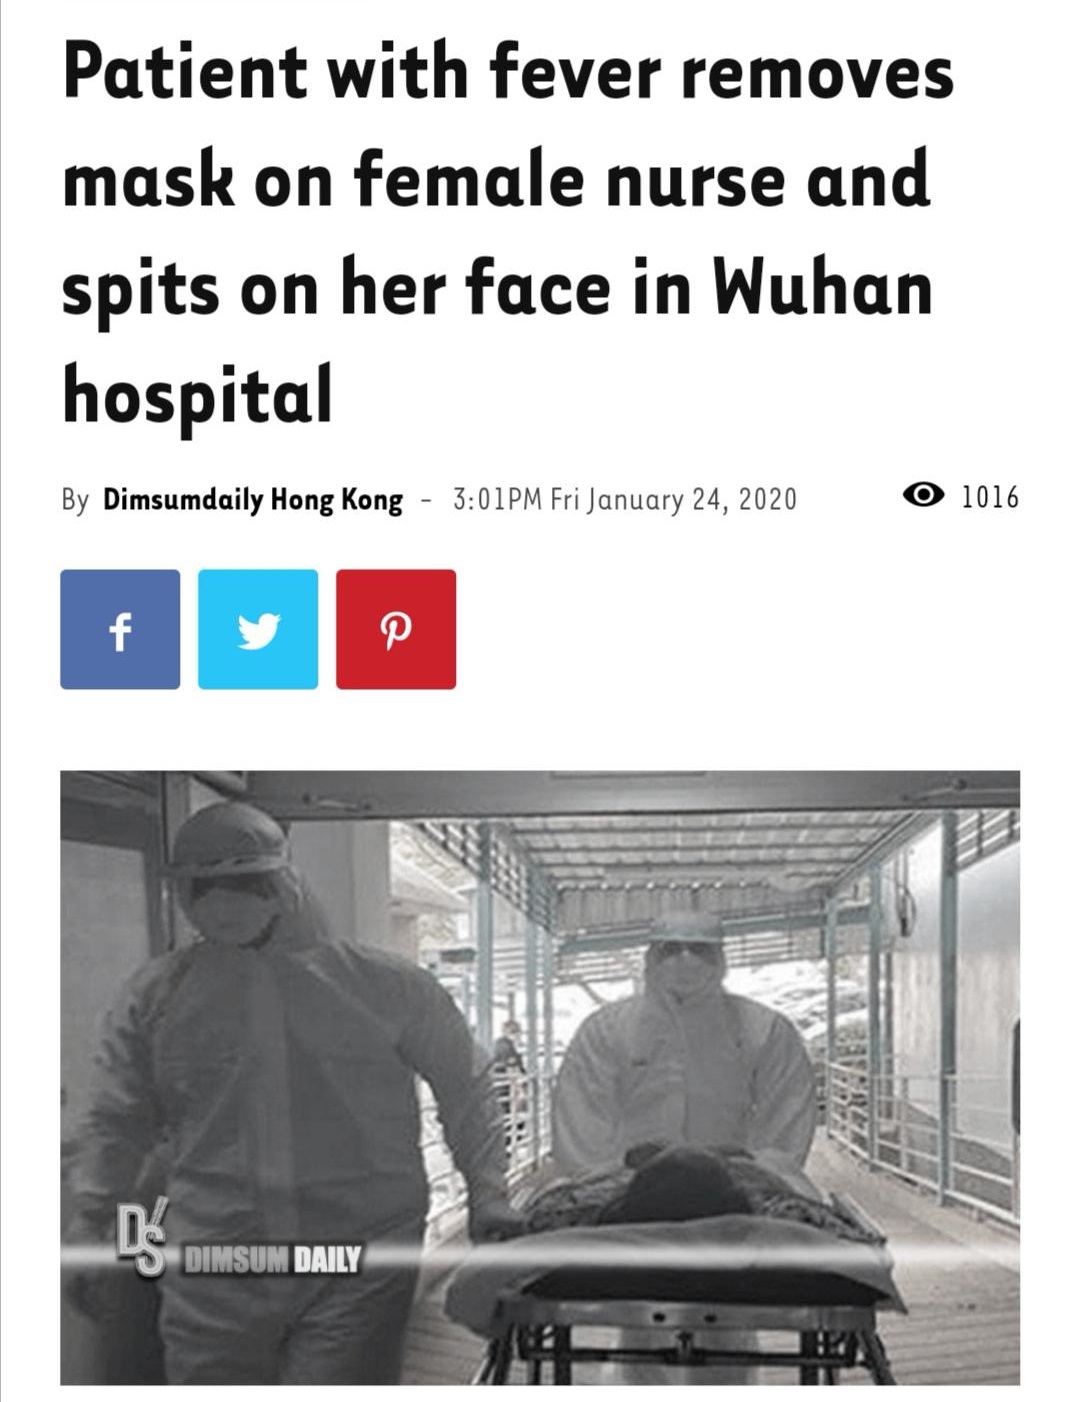 communication - Patient with fever removes mask on female nurse and spits on her face in Wuhan hospital By Dimsumdaily Hong Kong Pm Fri O 1016 Dimsum Daily